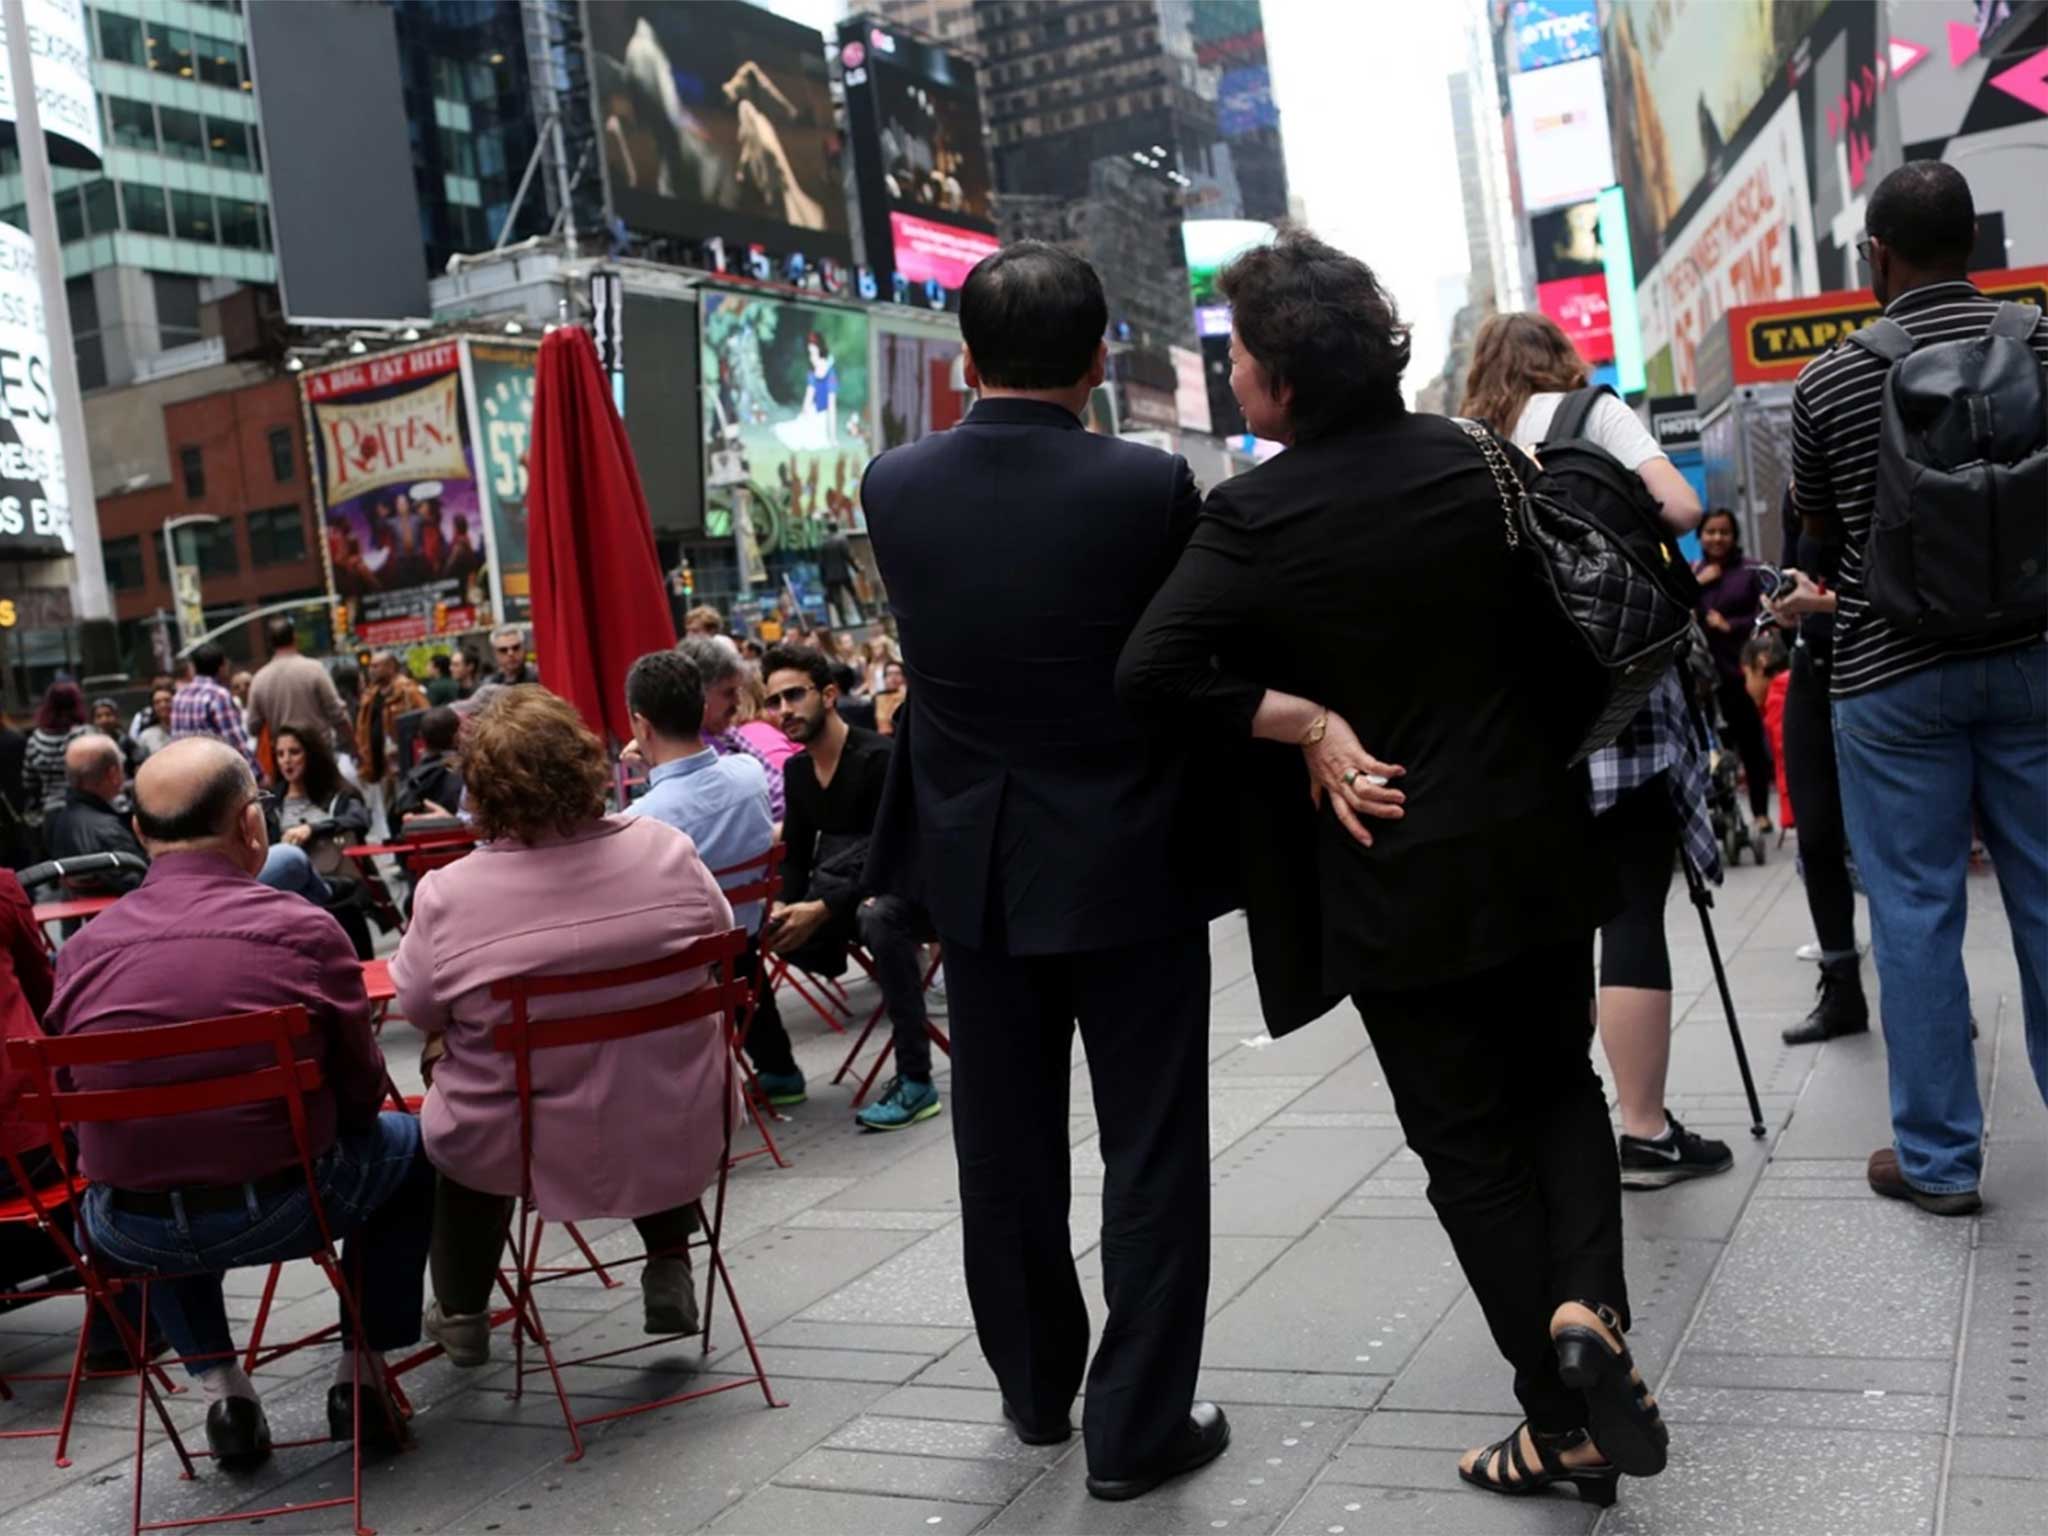 Kim Jong Un’s maternal aunt and her husband, known in North Korea as Ko Yong Suk and Ri Gang, pose for a portrait in New York’s Times Square. They have been living in the United States since 1998, and run a dry-cleaning store